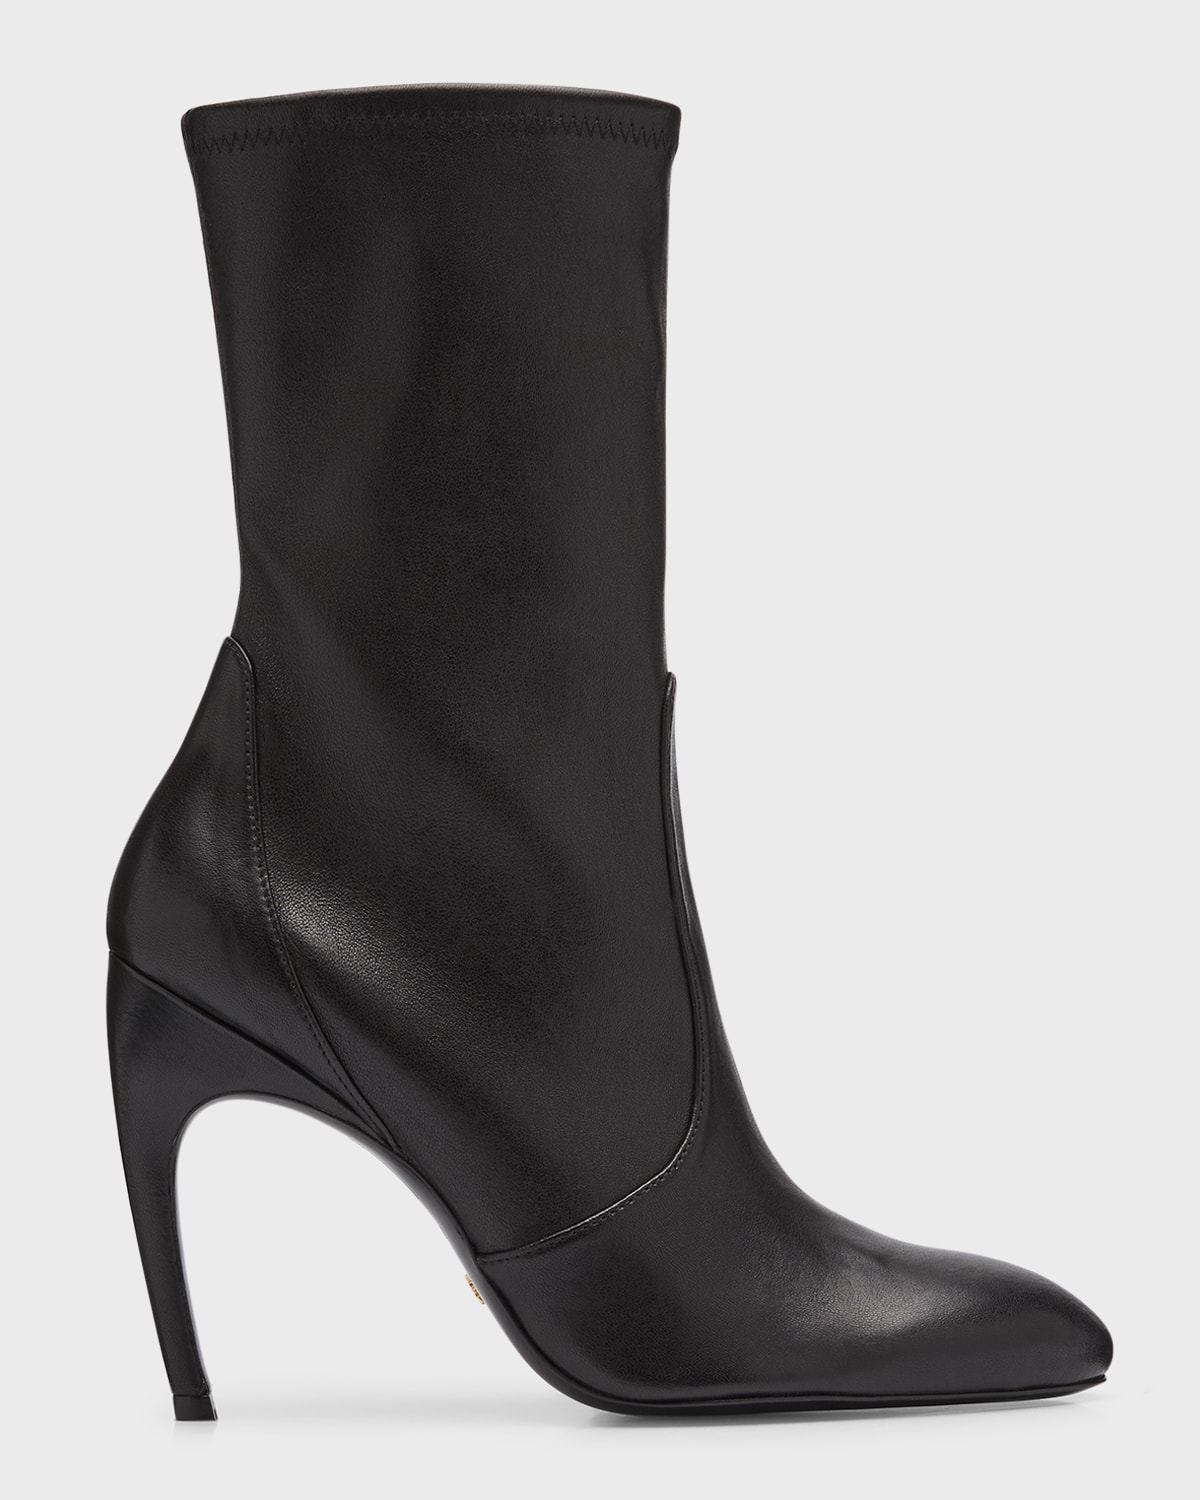 STUART WEITZMAN LUXECURVE STRETCH LEATHER ANKLE BOOTIES